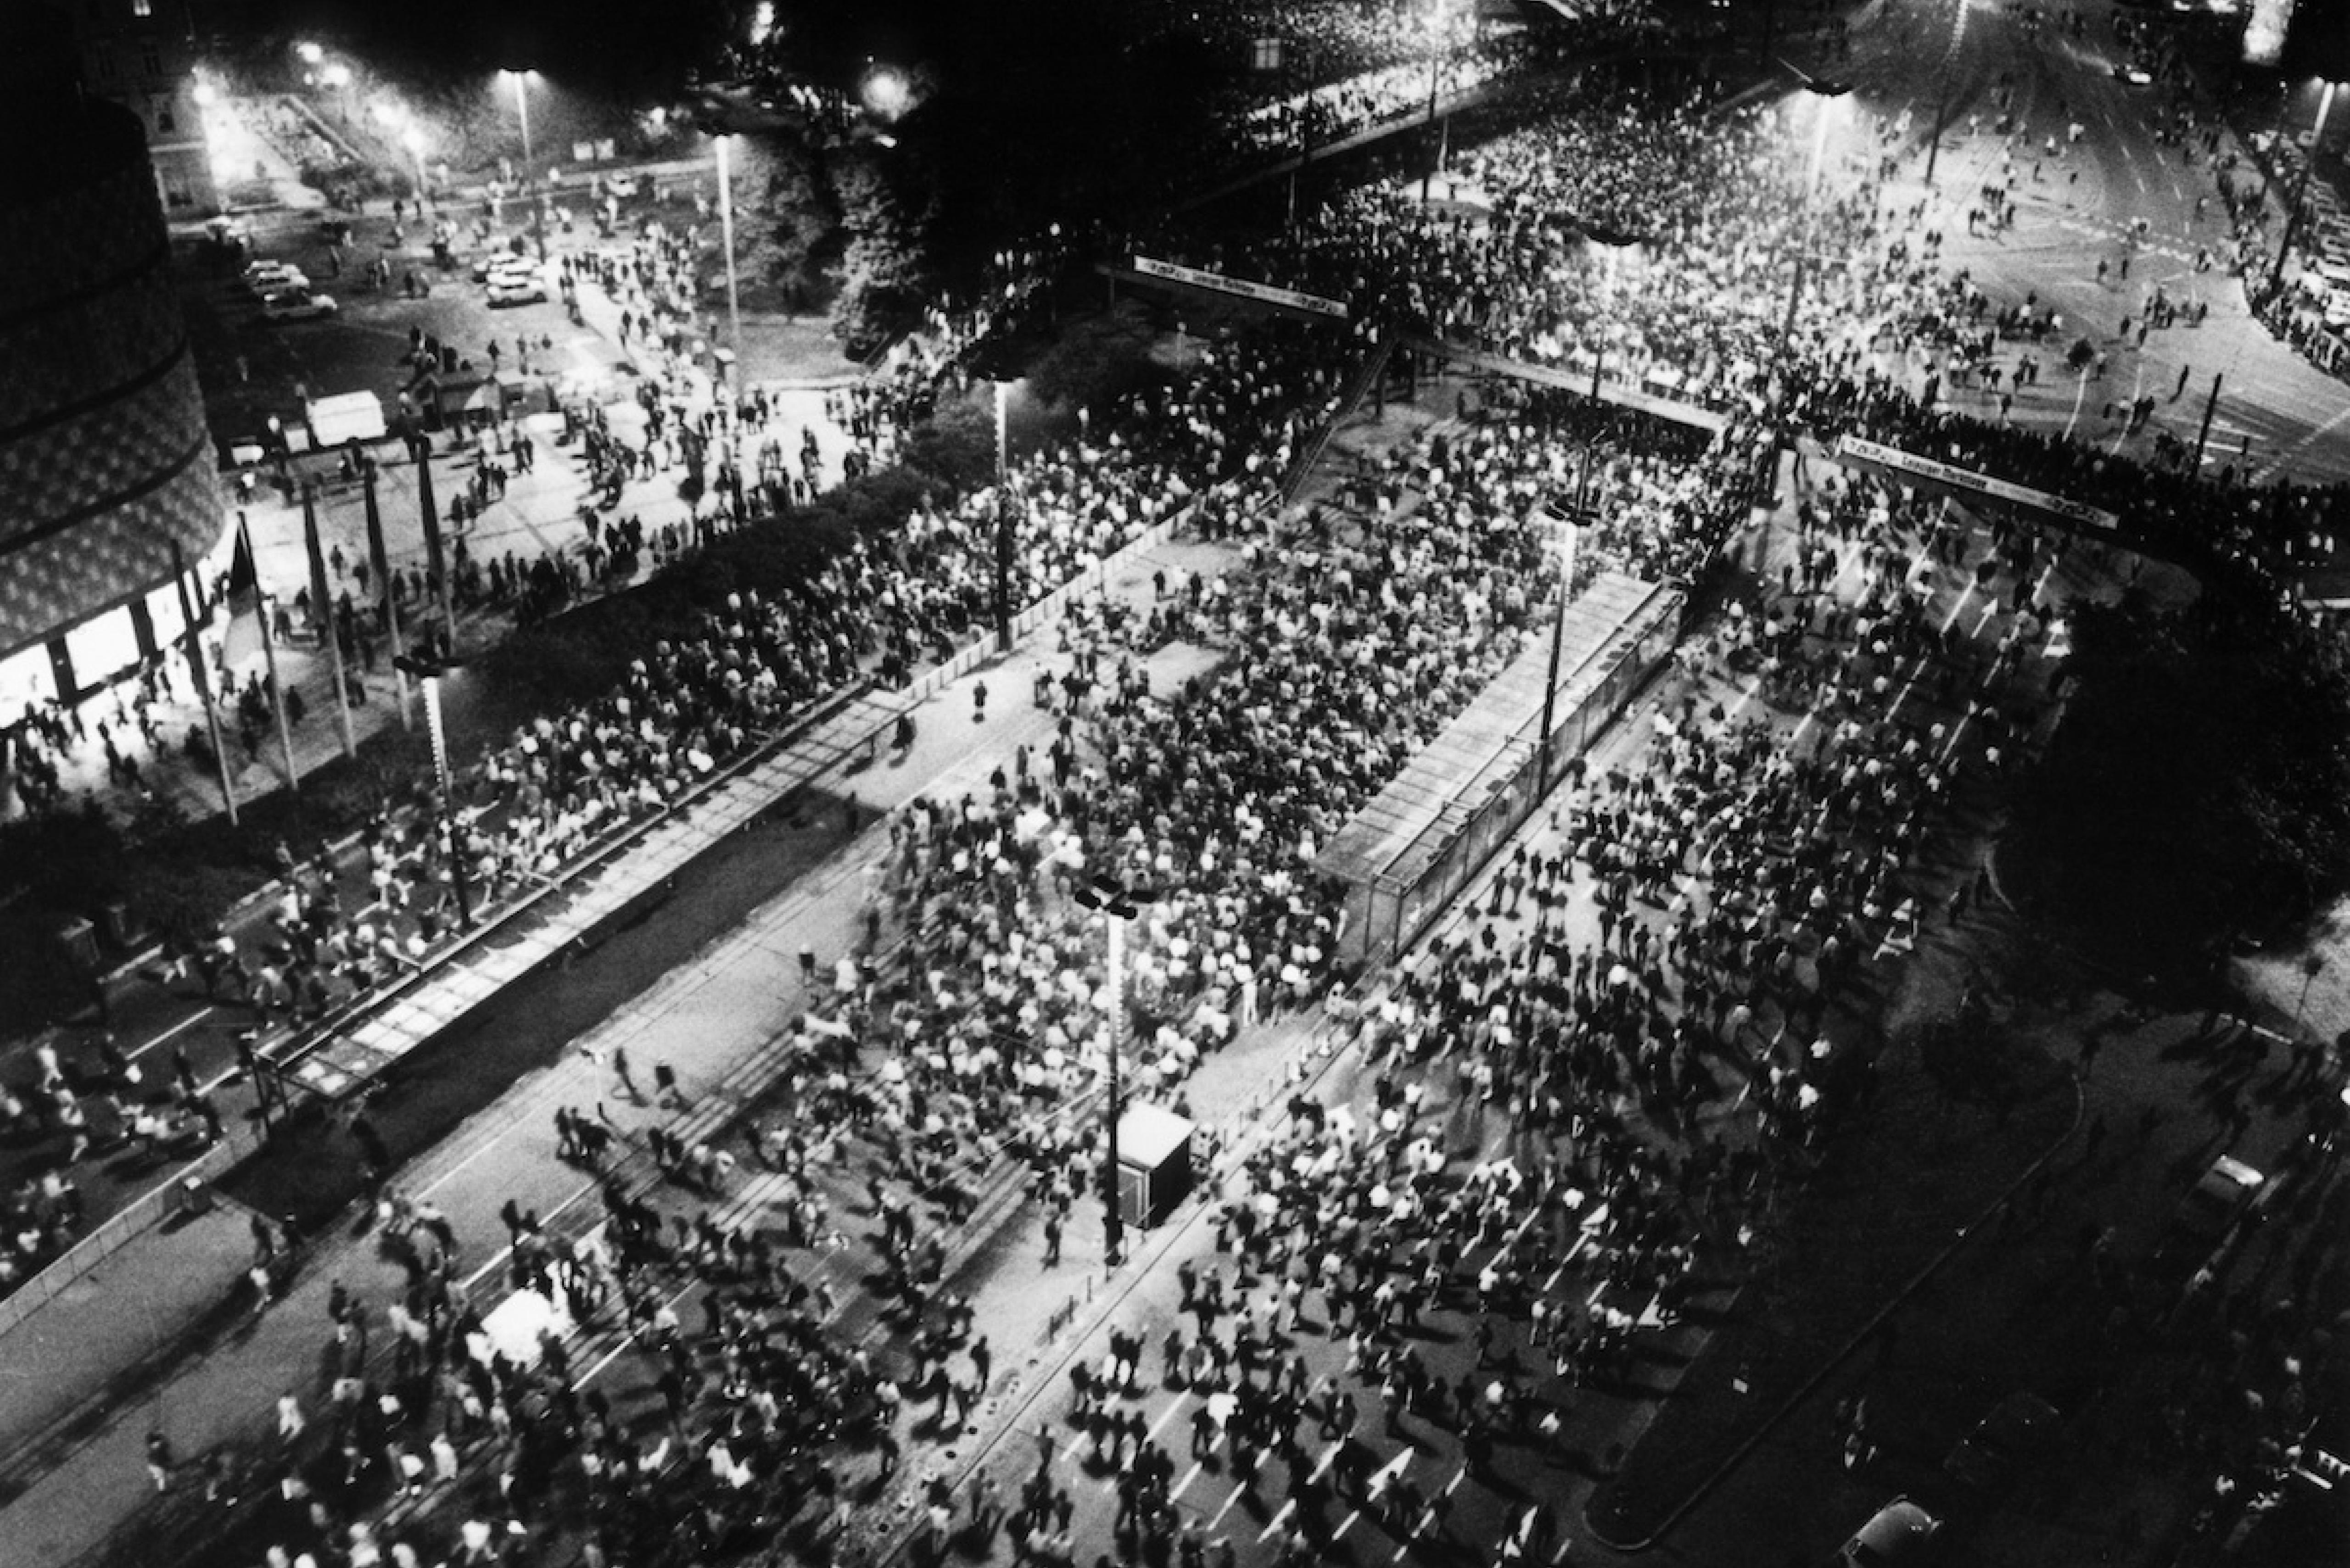 Black and white photo: A bird’s eye view of a big street and tram station in the evening. The street and station are crowded with people who are walking in a protest march.